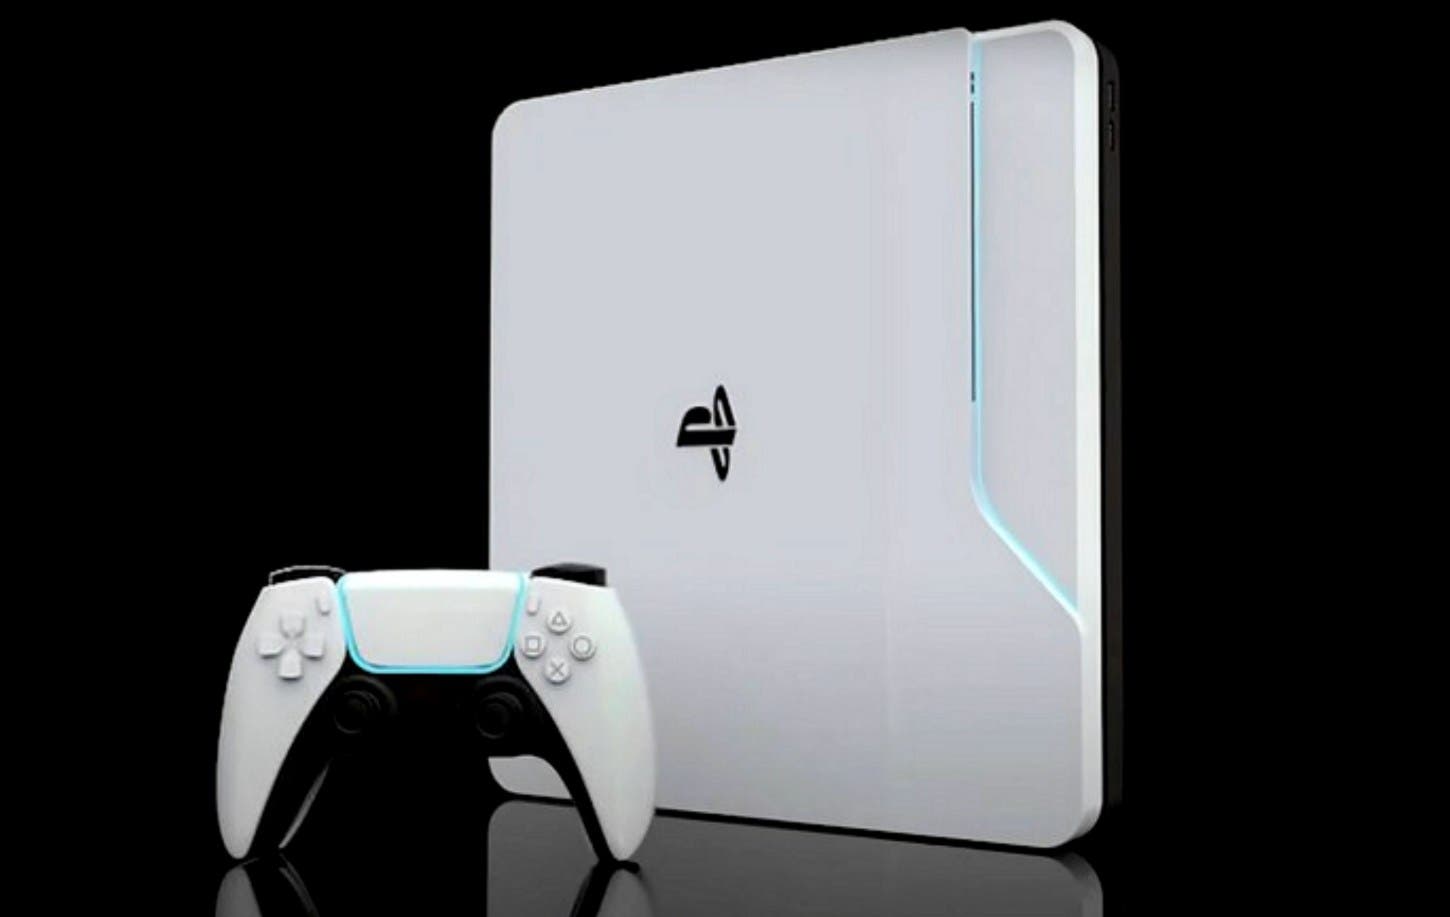 PS5 News - All About Sony PlayStation 5: Specs, Price, Controller, Games